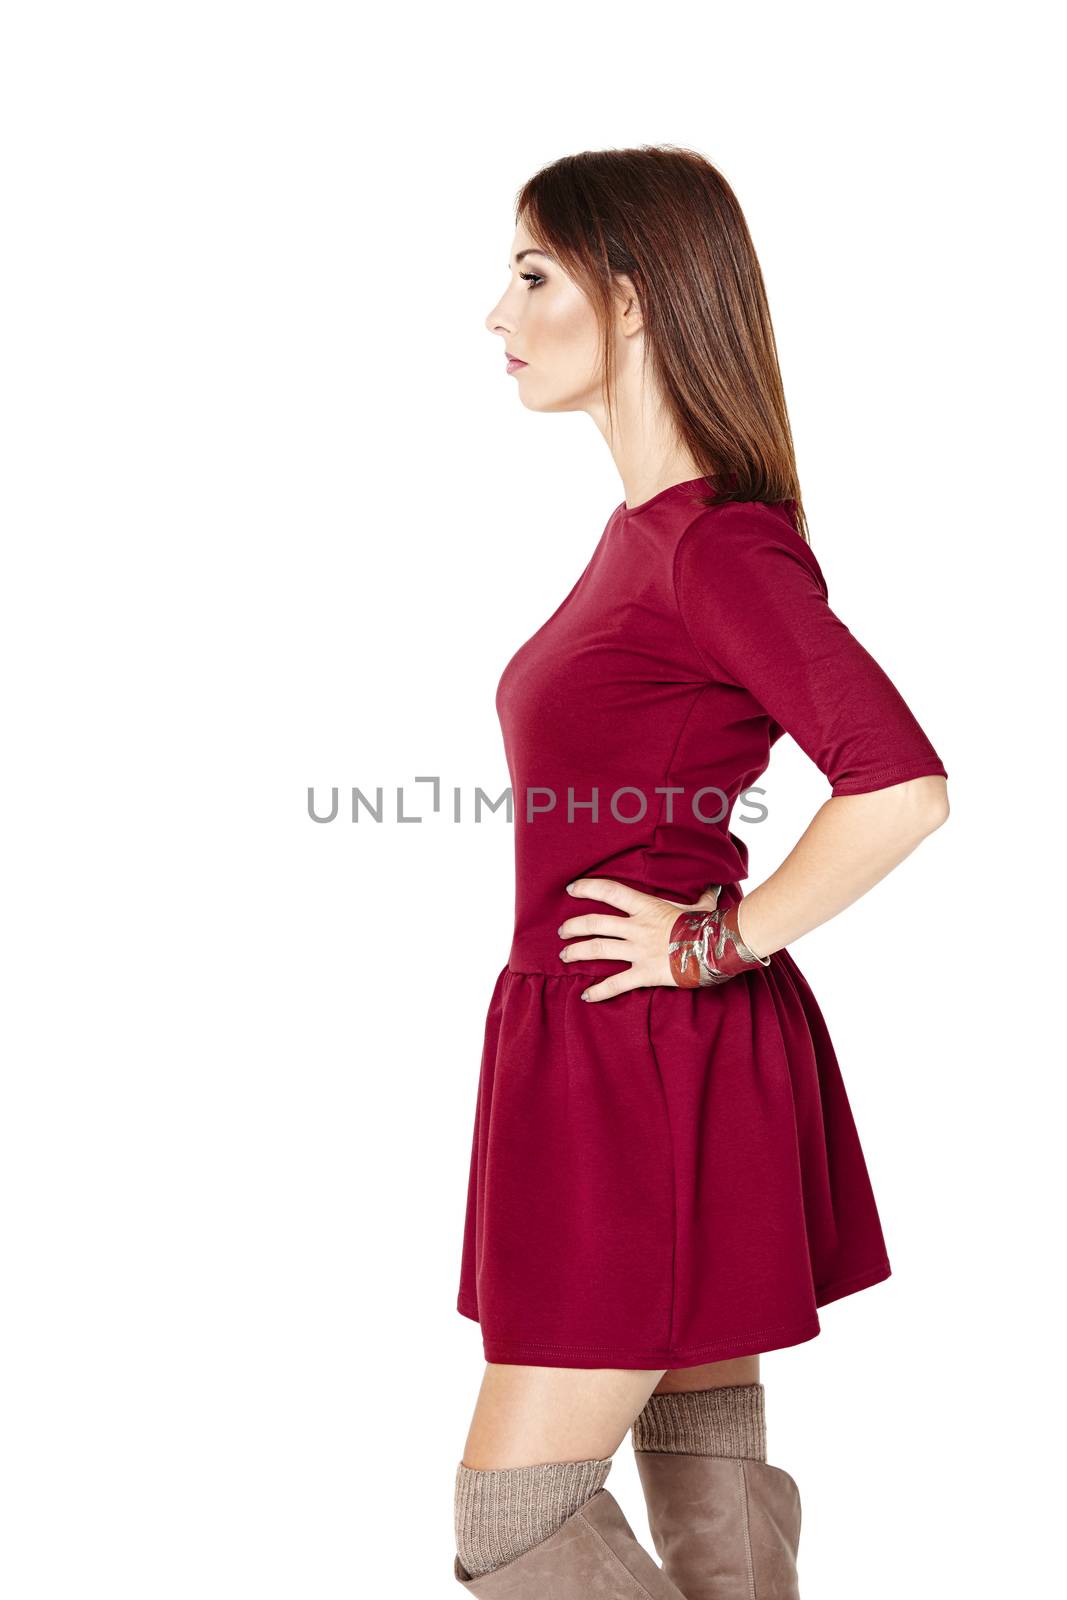 Side view of young woman posing in a red dress.